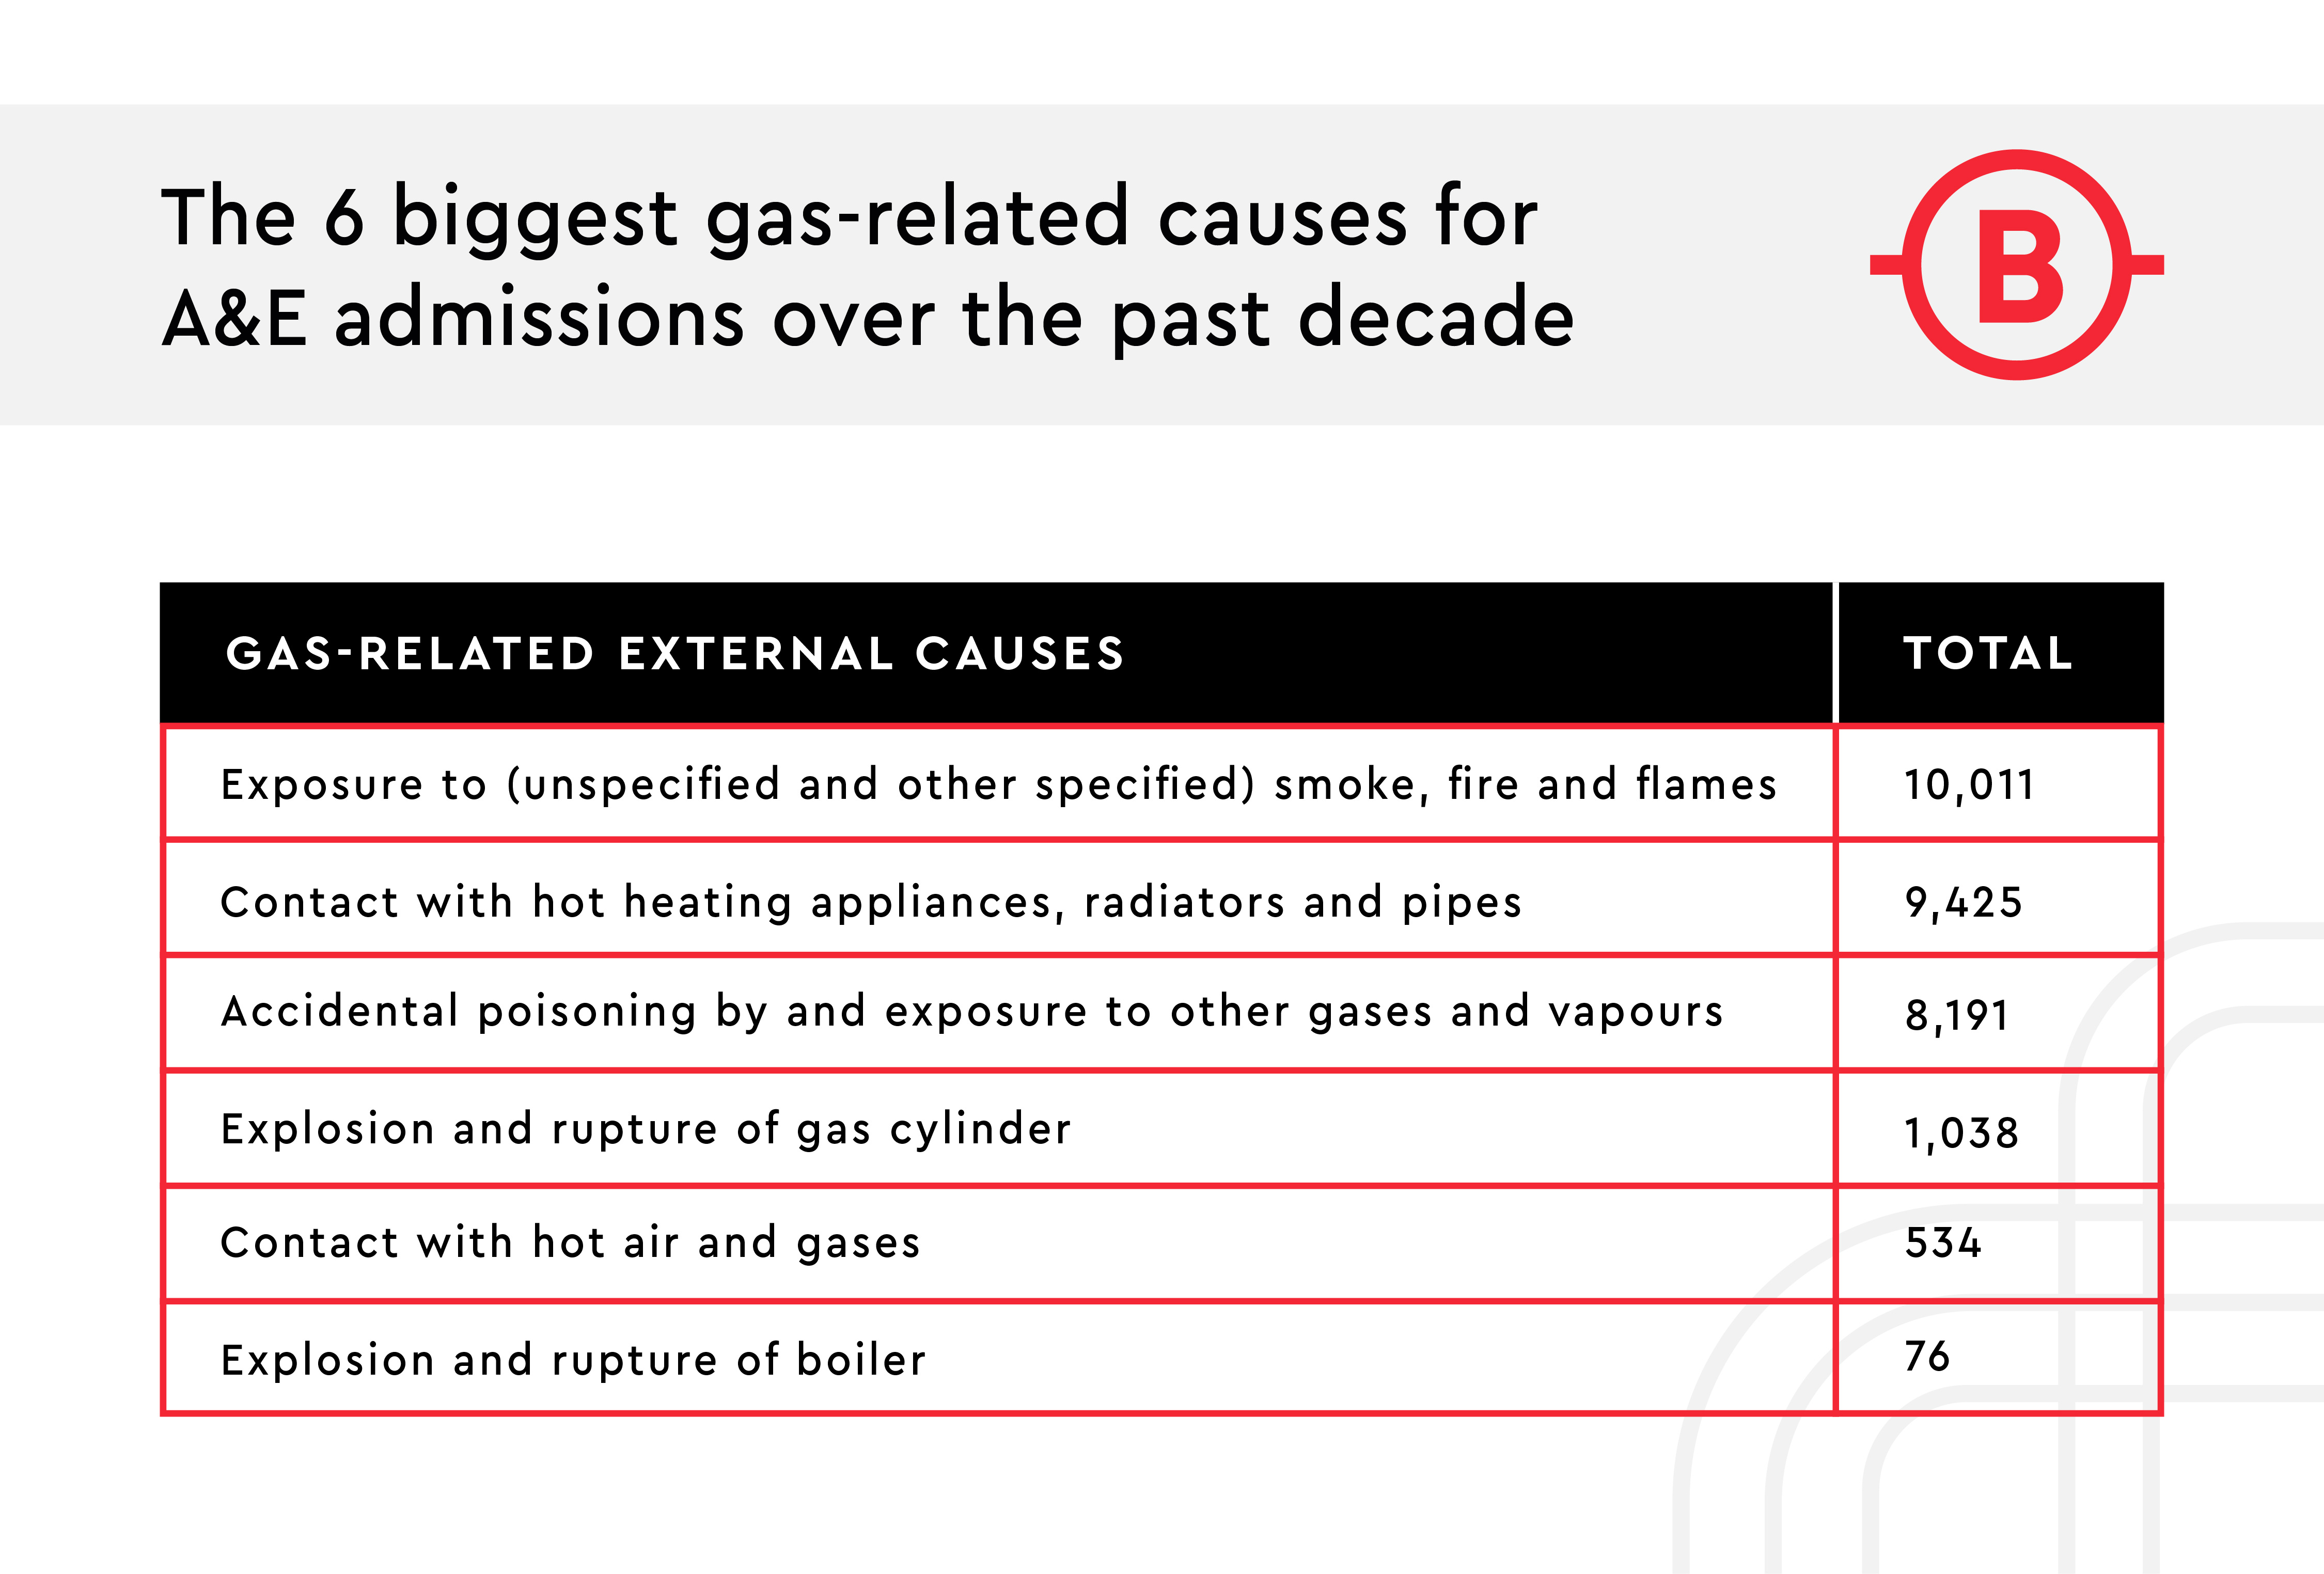 A table containing the 6 biggest gas-related causes for A&E admissions over the last decade